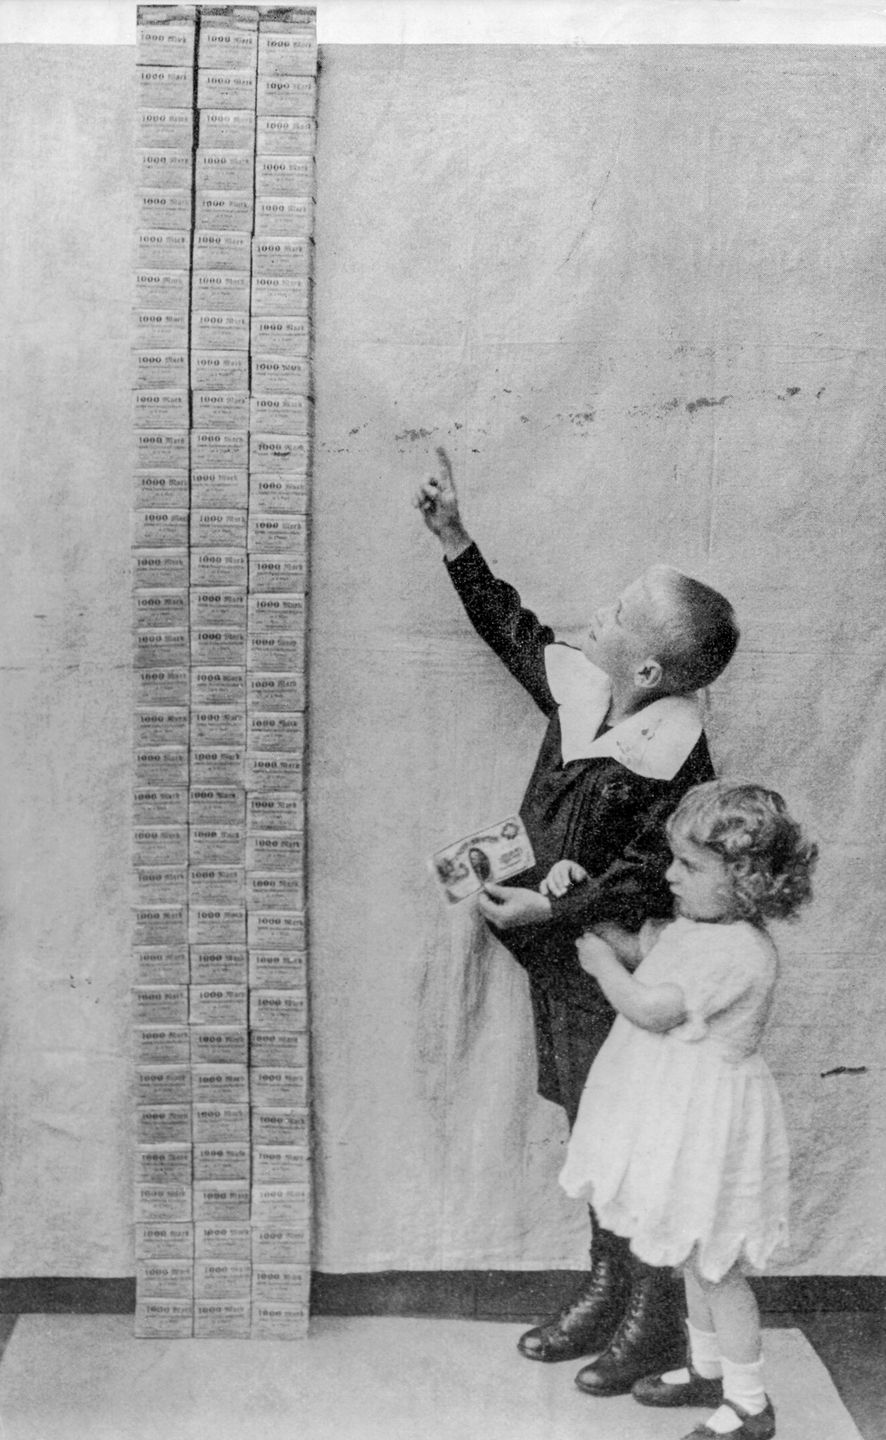 The aftermath of world war 1 - Children stand next to a tower of 100,000 marks, equal in value to one US dollar. 